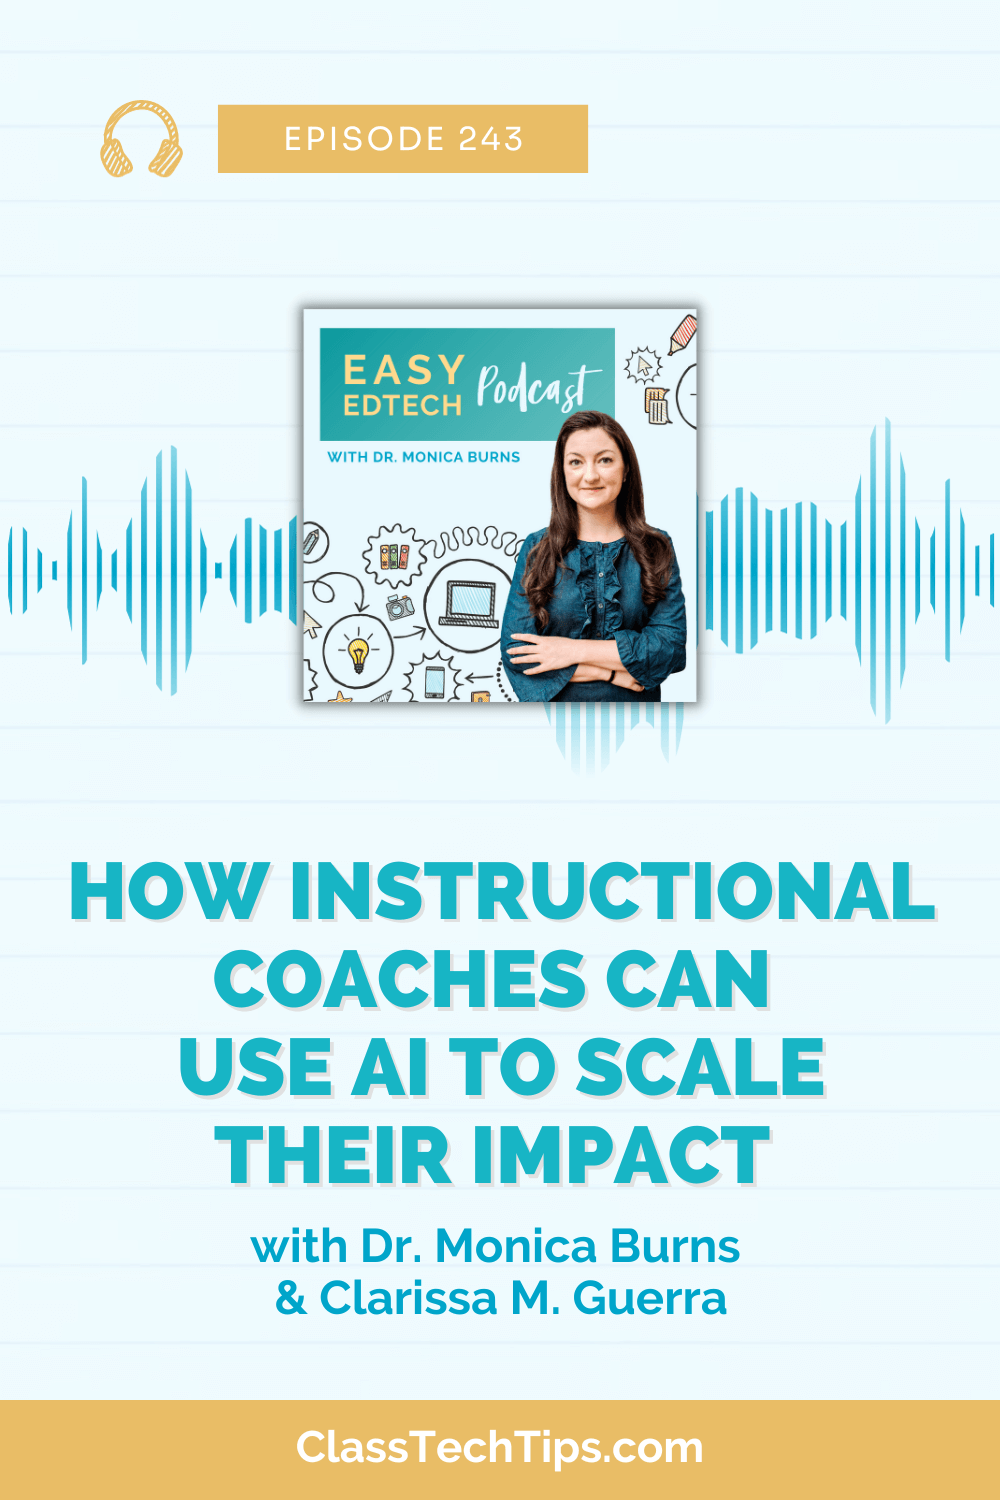 Podcast logo featured alongside an image representing a discussion with Instructional Coach Clarissa M. Guerra on utilizing AI tools in educational coaching.